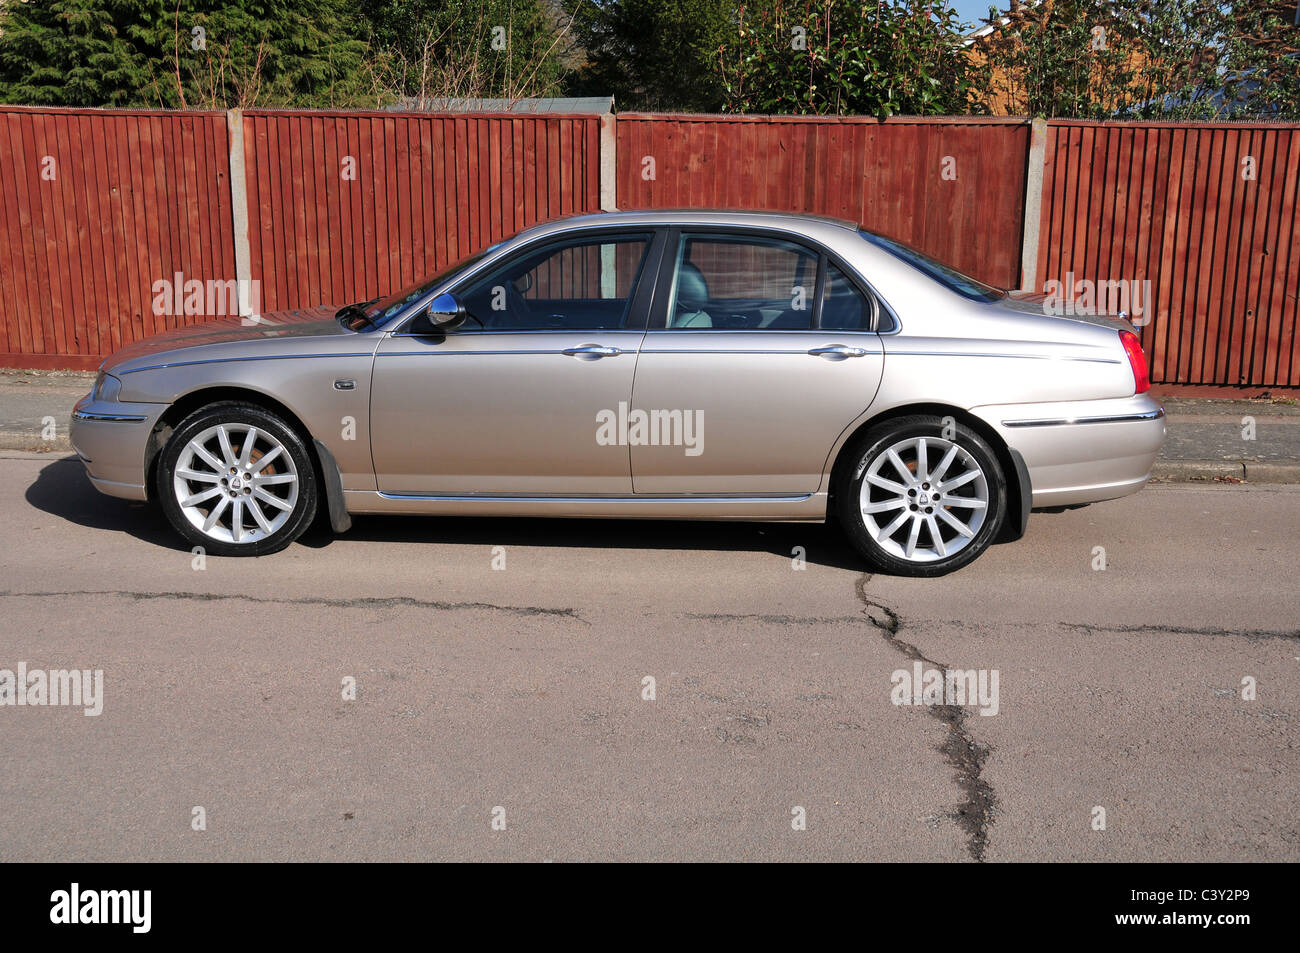 Rover 75 High Resolution Stock Photography and Images - Alamy